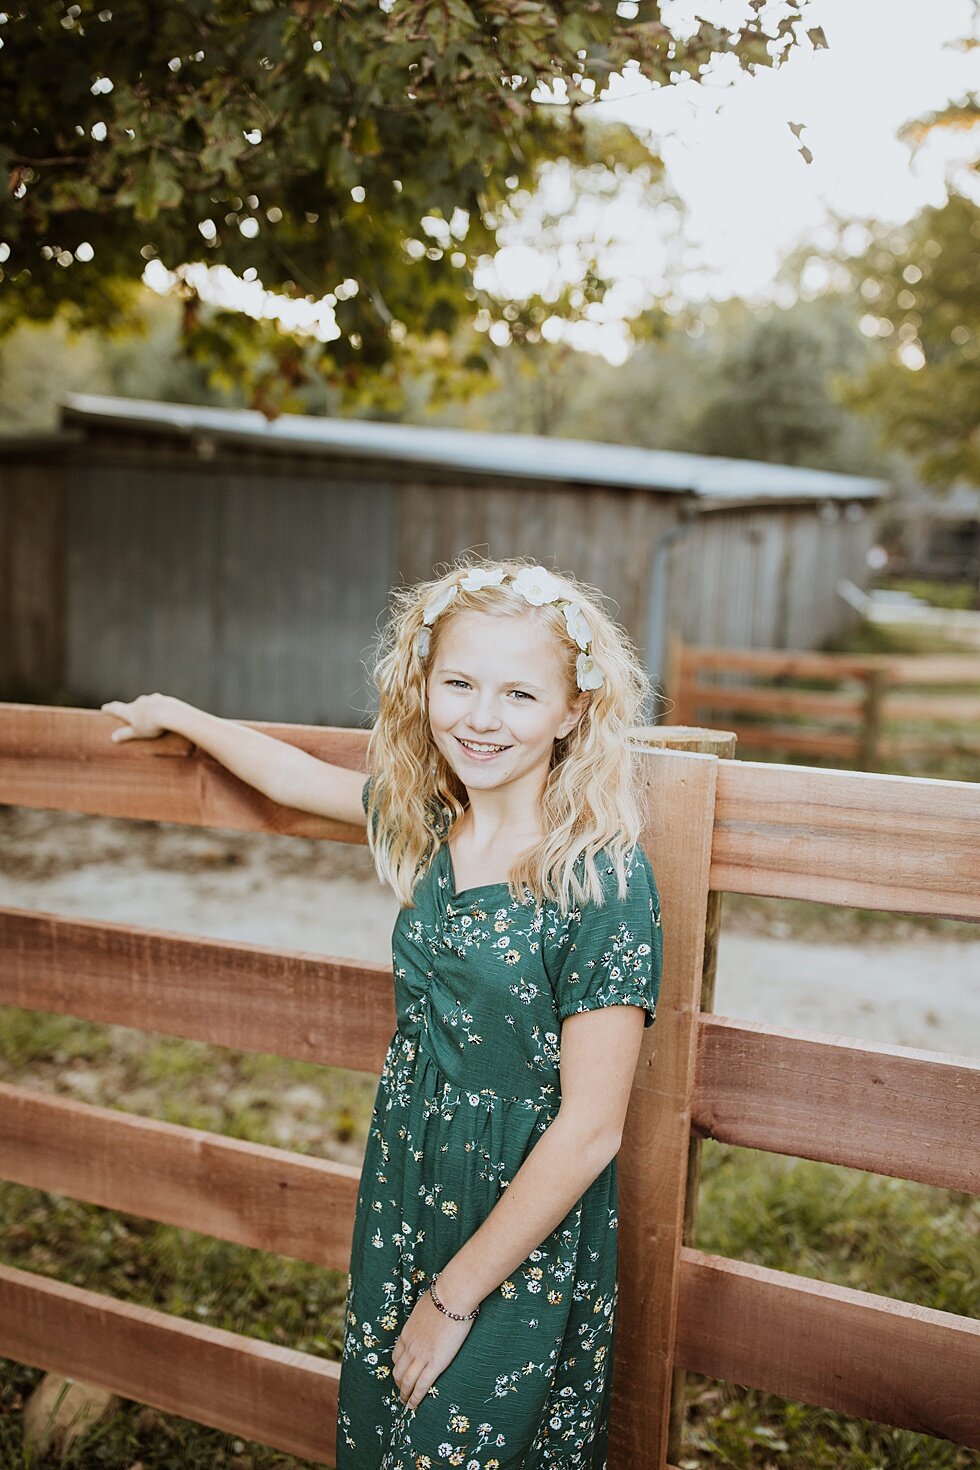  Emerald green floral dress worn by this daughter during her mother and daughter photo session in Louisville, Kentucky. Fall Louisville Kentucky photographer mother daughter photography session portraits loving relationship western girls country root